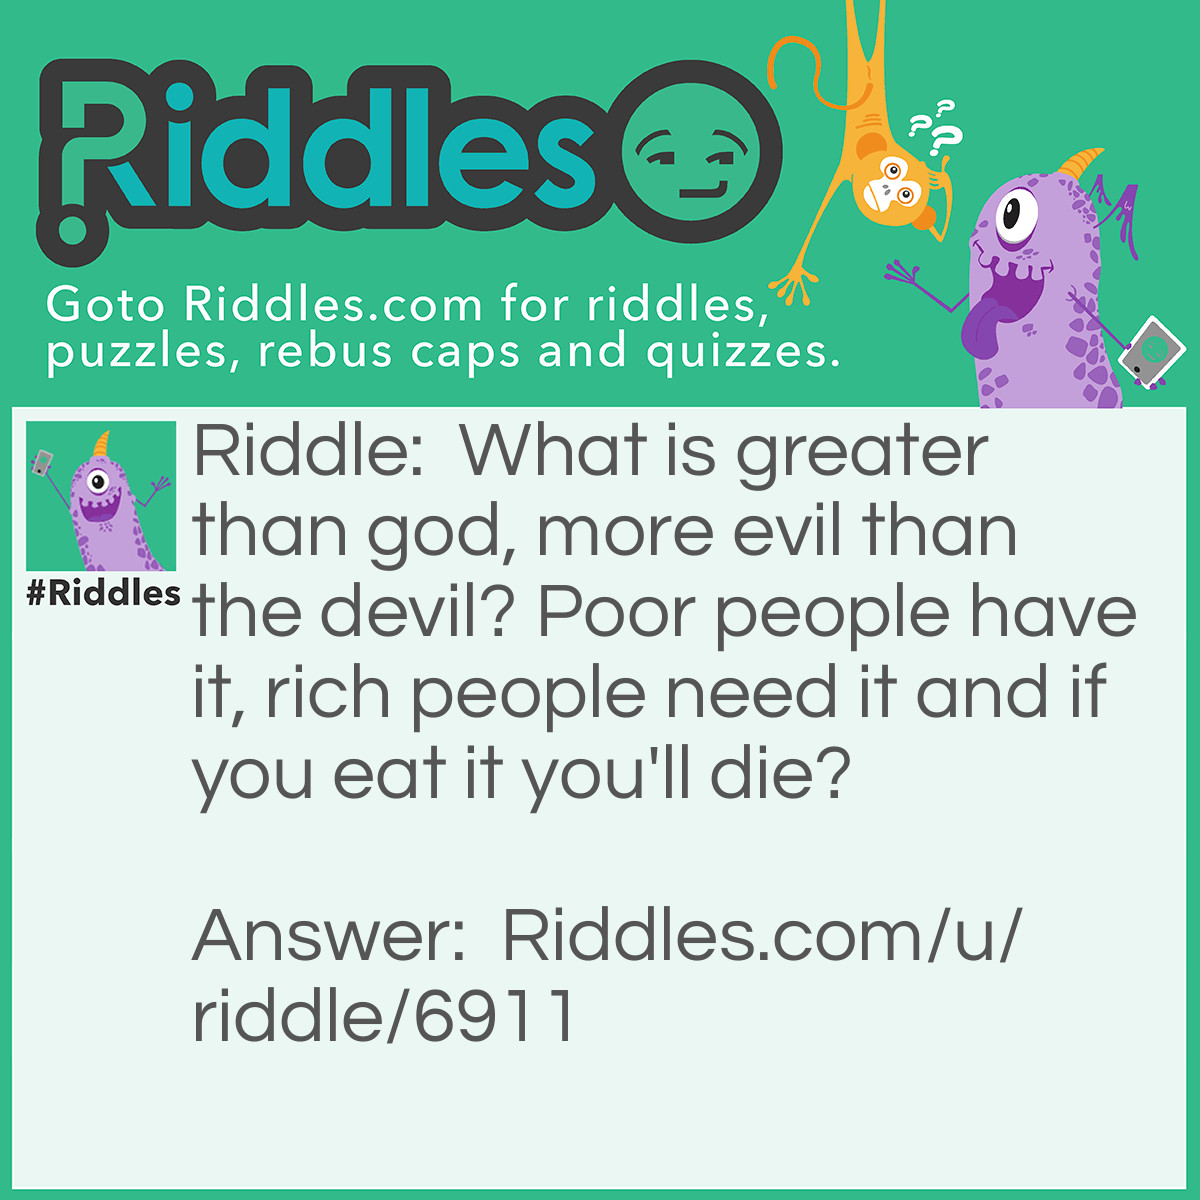 Riddle: What is greater than god, more evil than the devil? Poor people have it, rich people need it and if you eat it you'll die? Answer: Nothing.